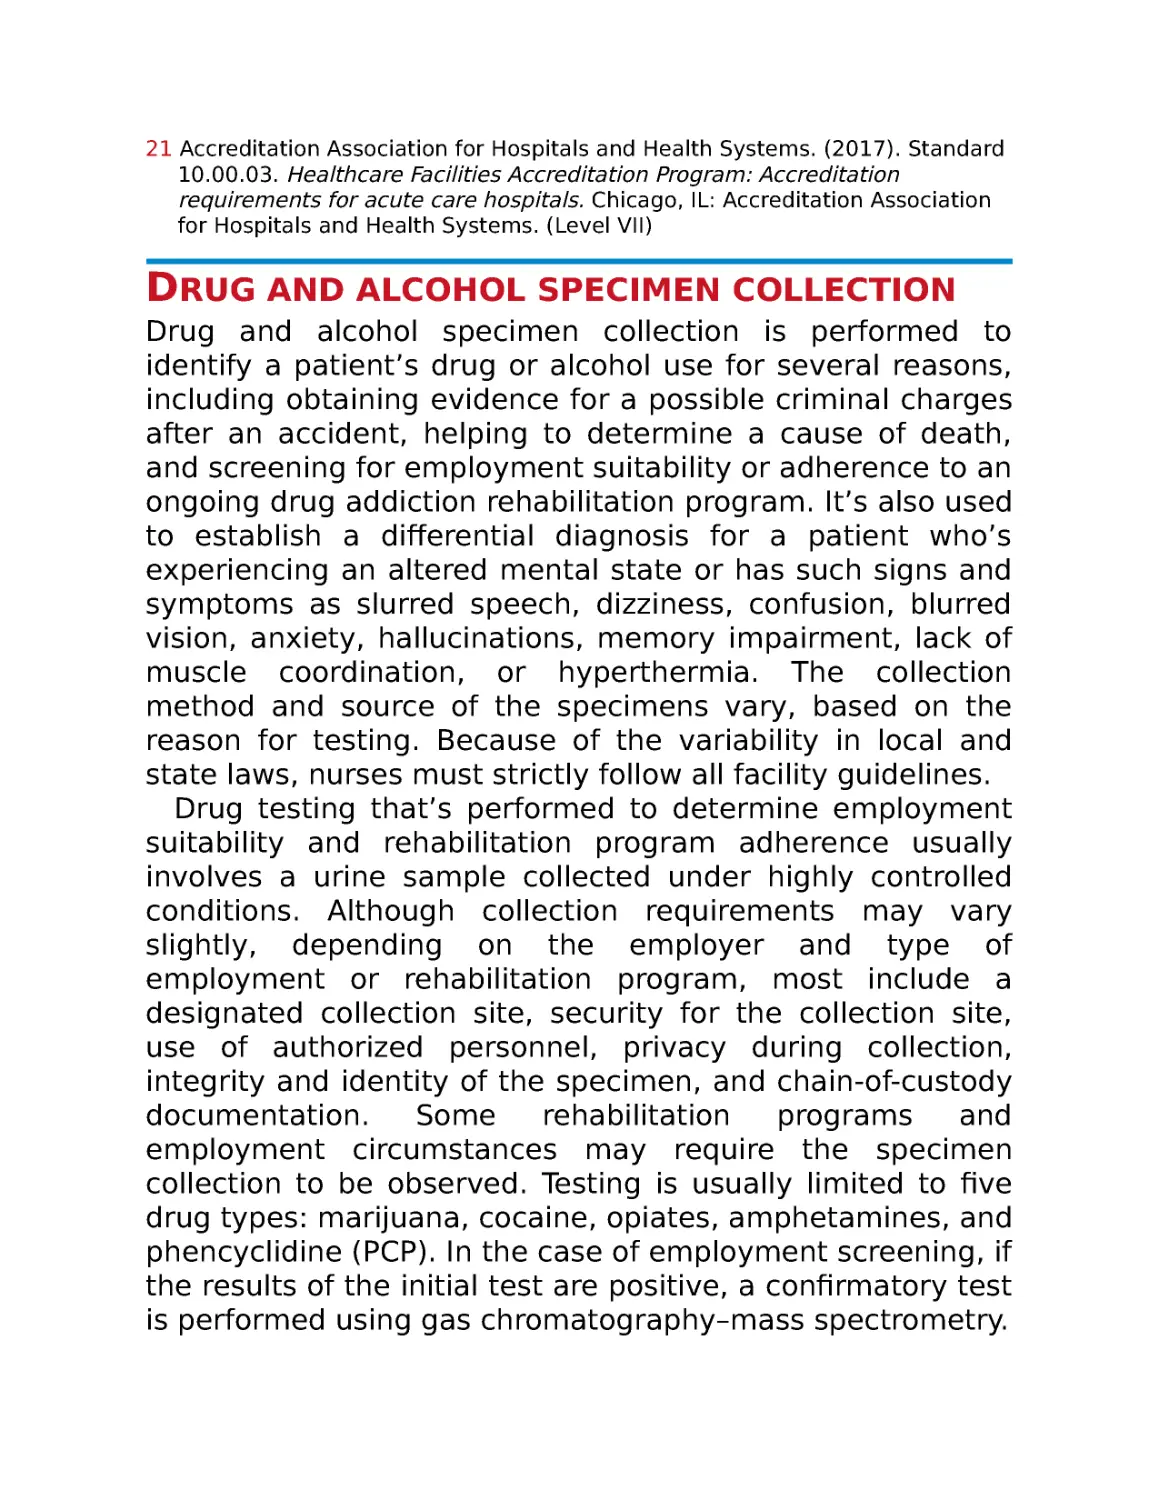 Drug and alcohol specimen collection